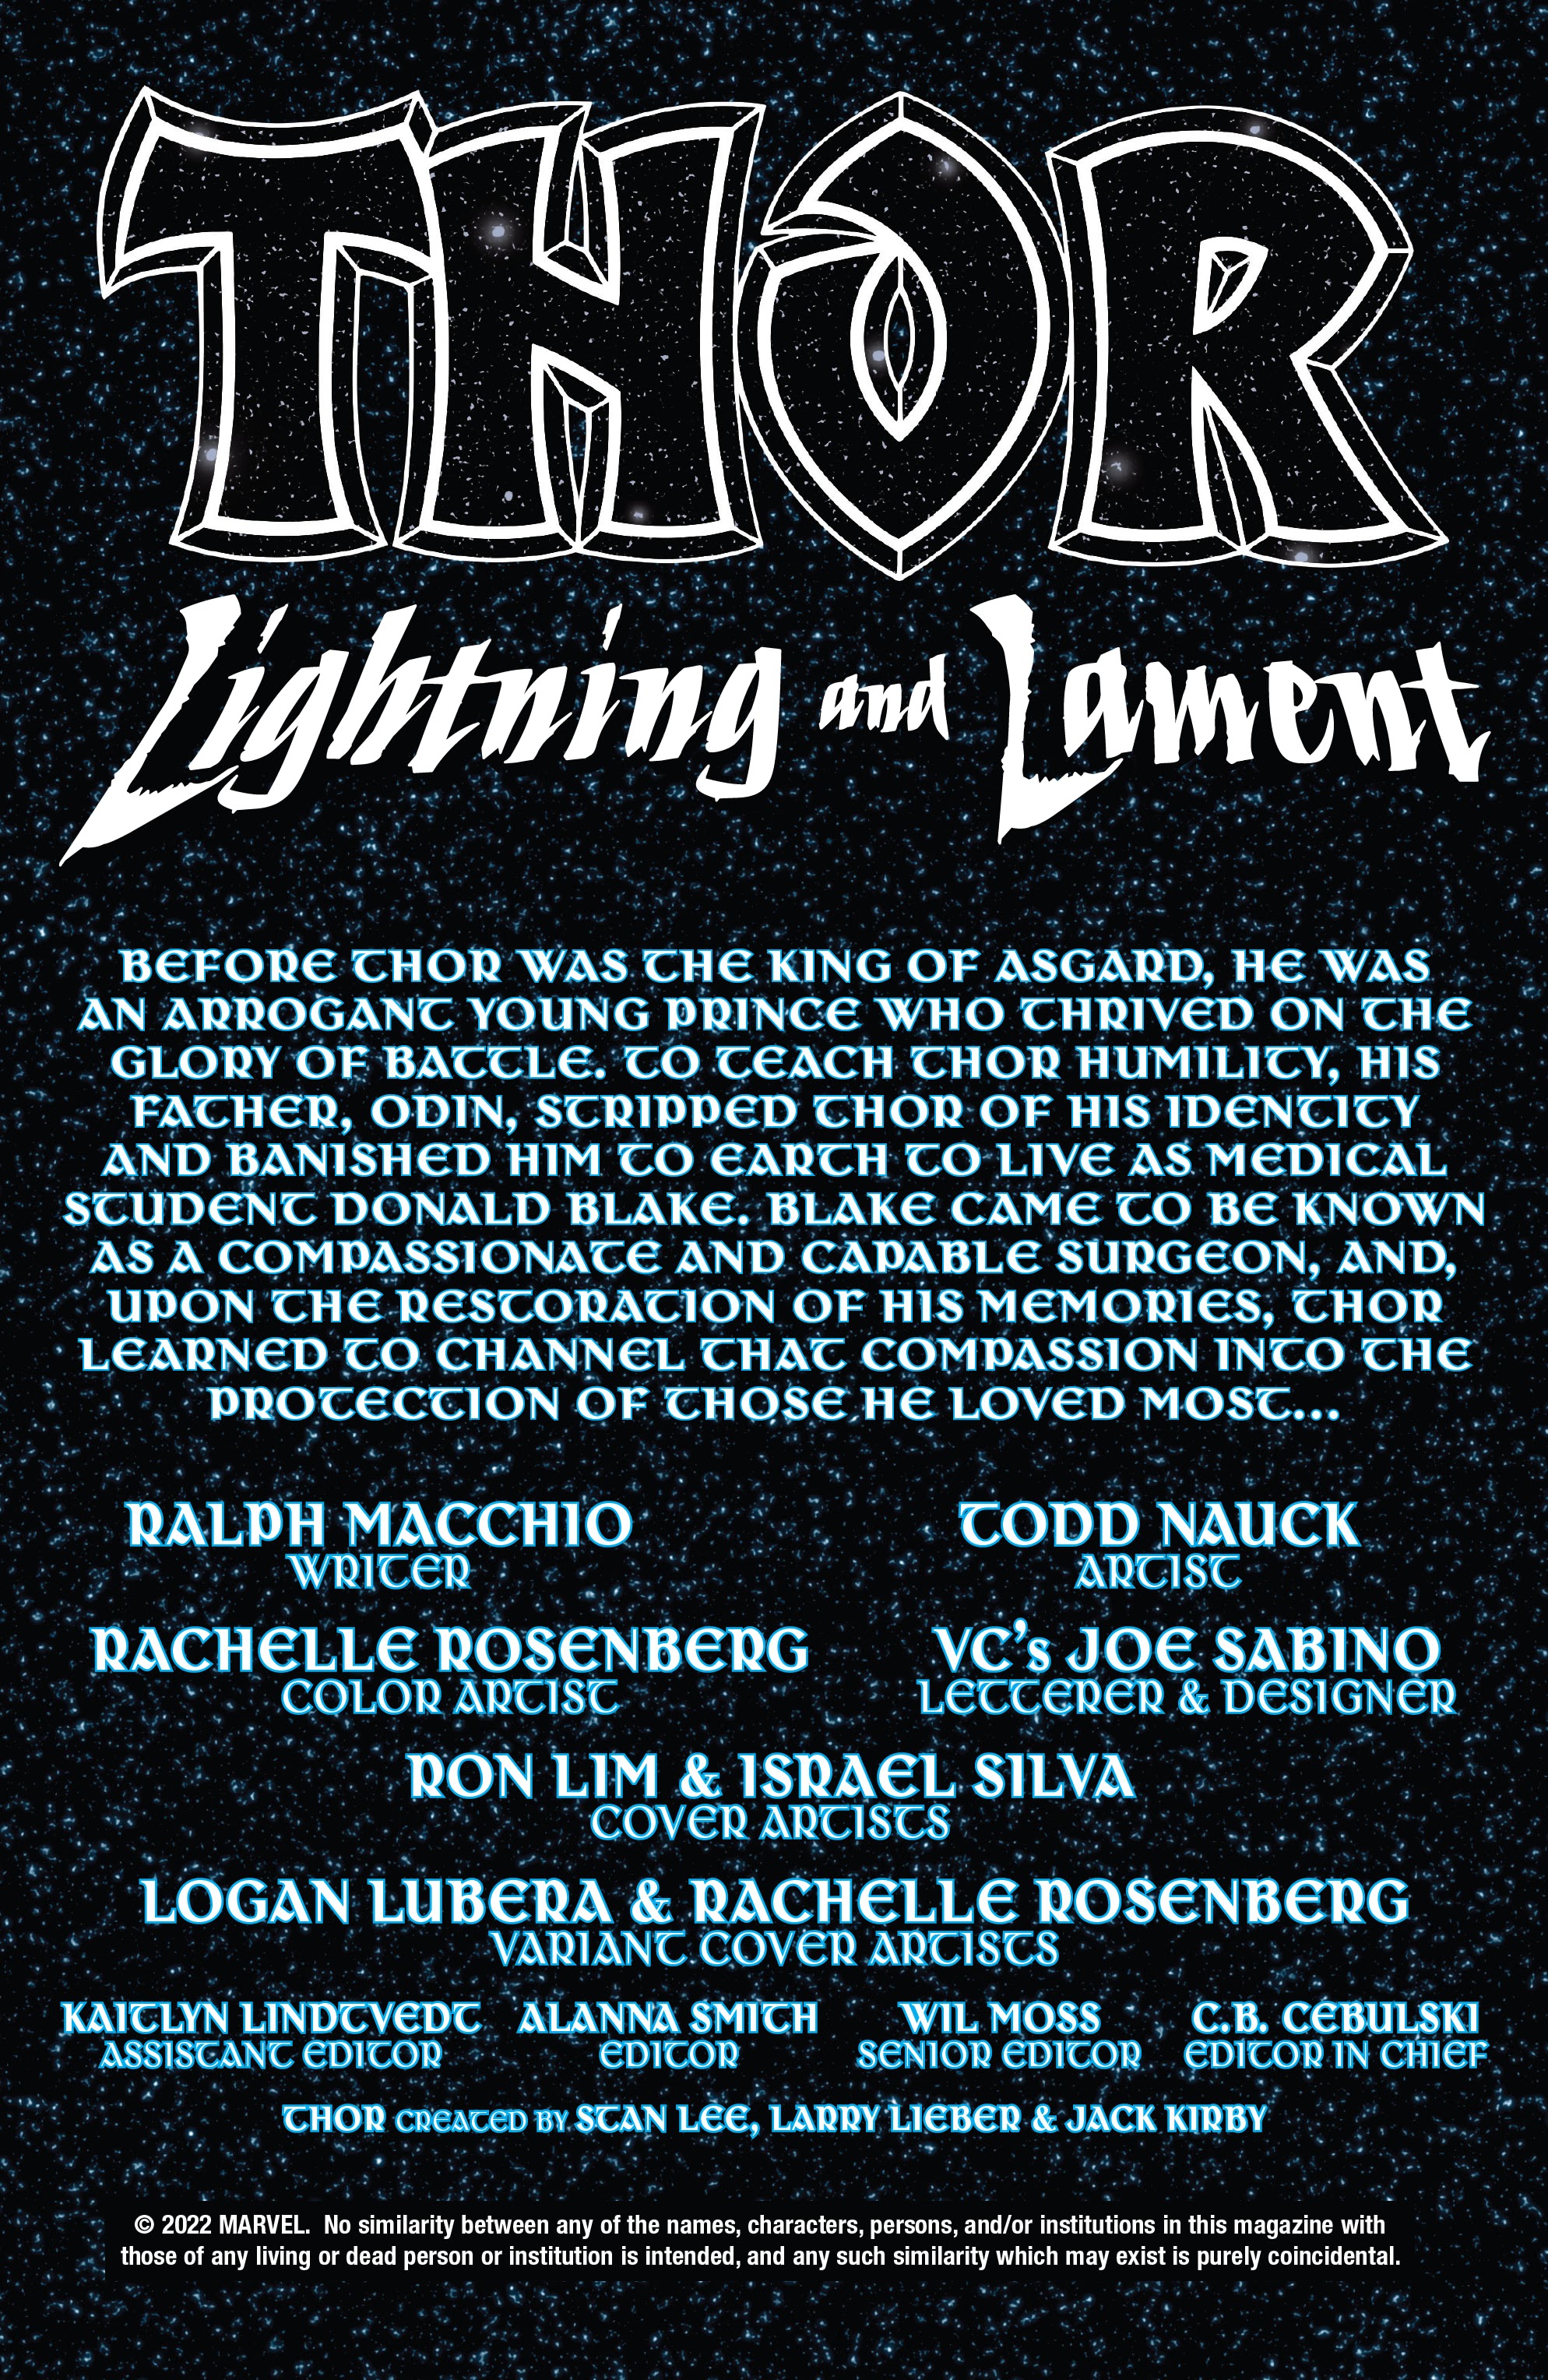 Read online Thor: Lightning and Lament comic -  Issue #1 - 3